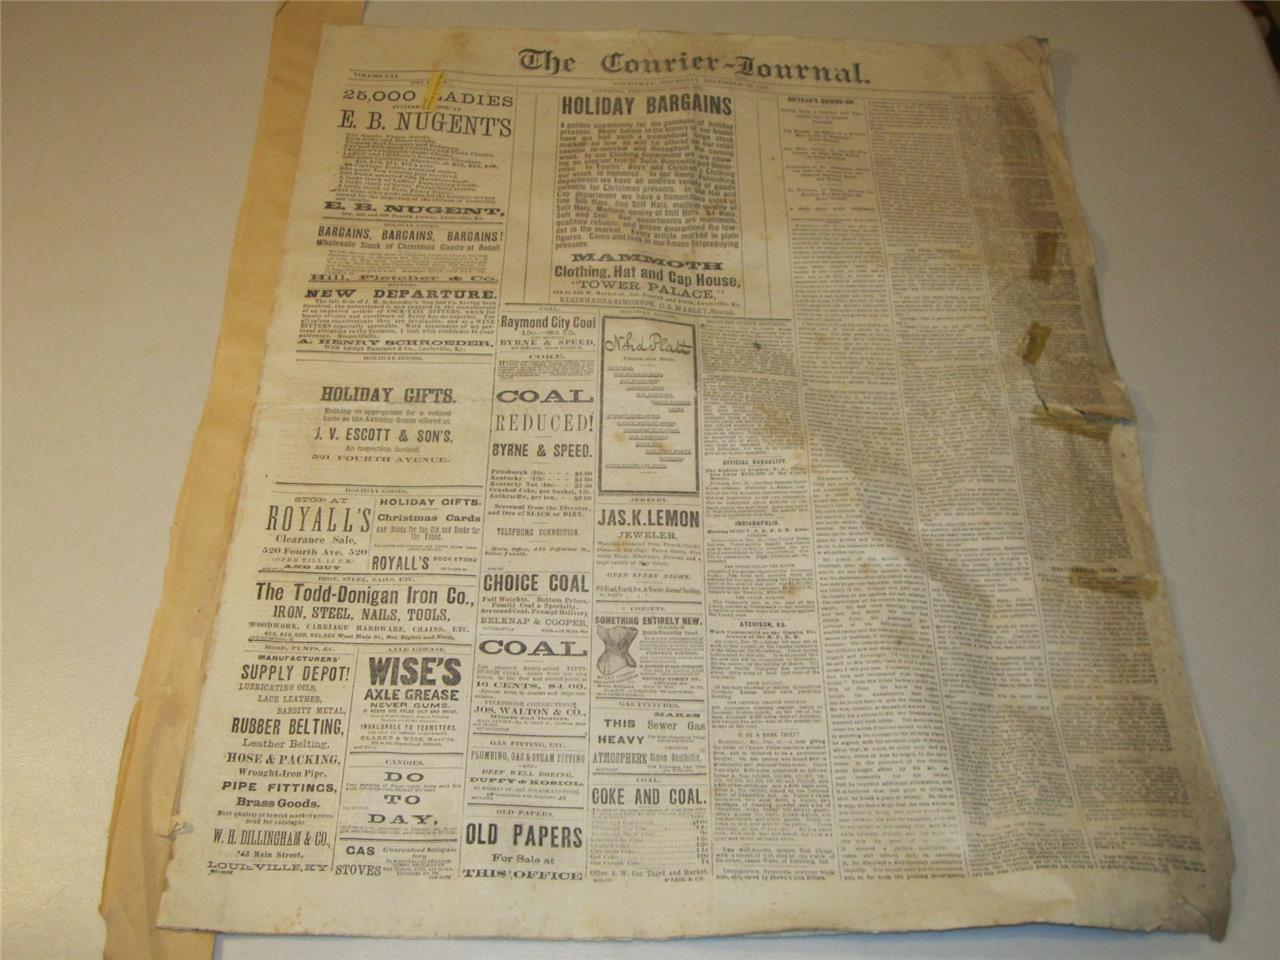 The Courier Journal Newspaper from Thursday, December 22, 1881